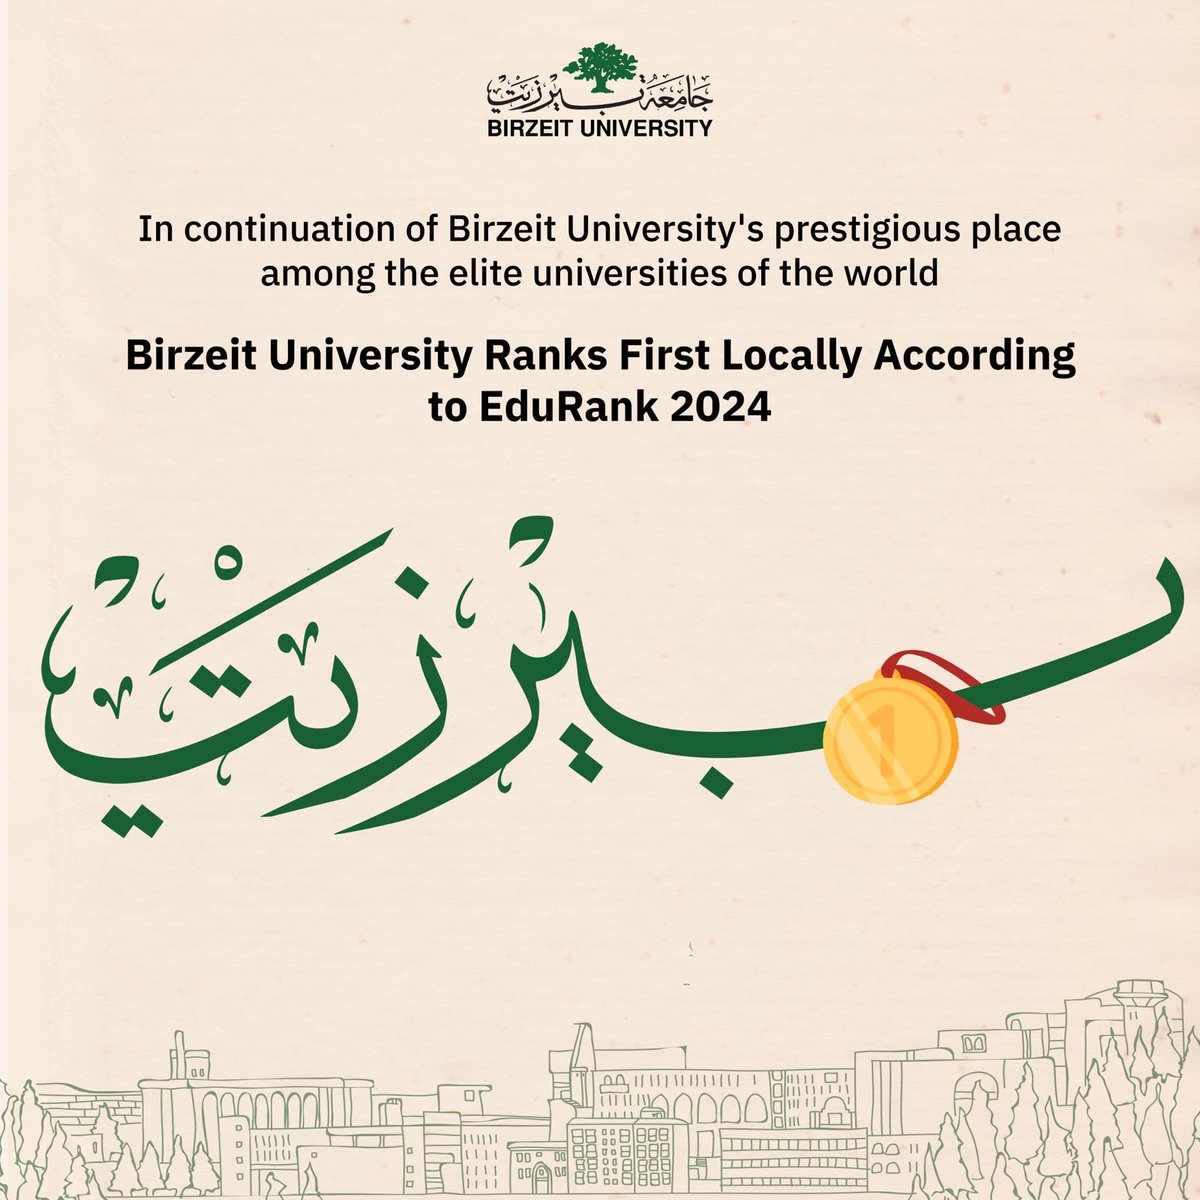 #Birzeit_University secured first place out 27 higher education institutions locally in the 2024 EduRank rankings, 672 out of 5,830 in #Asia, and 2,235 out of 14,131 #worldwide. To view Birzeit University’s rankings in #EduRank, follow the EduRank link : edurank.org/uni/birzeit-un…